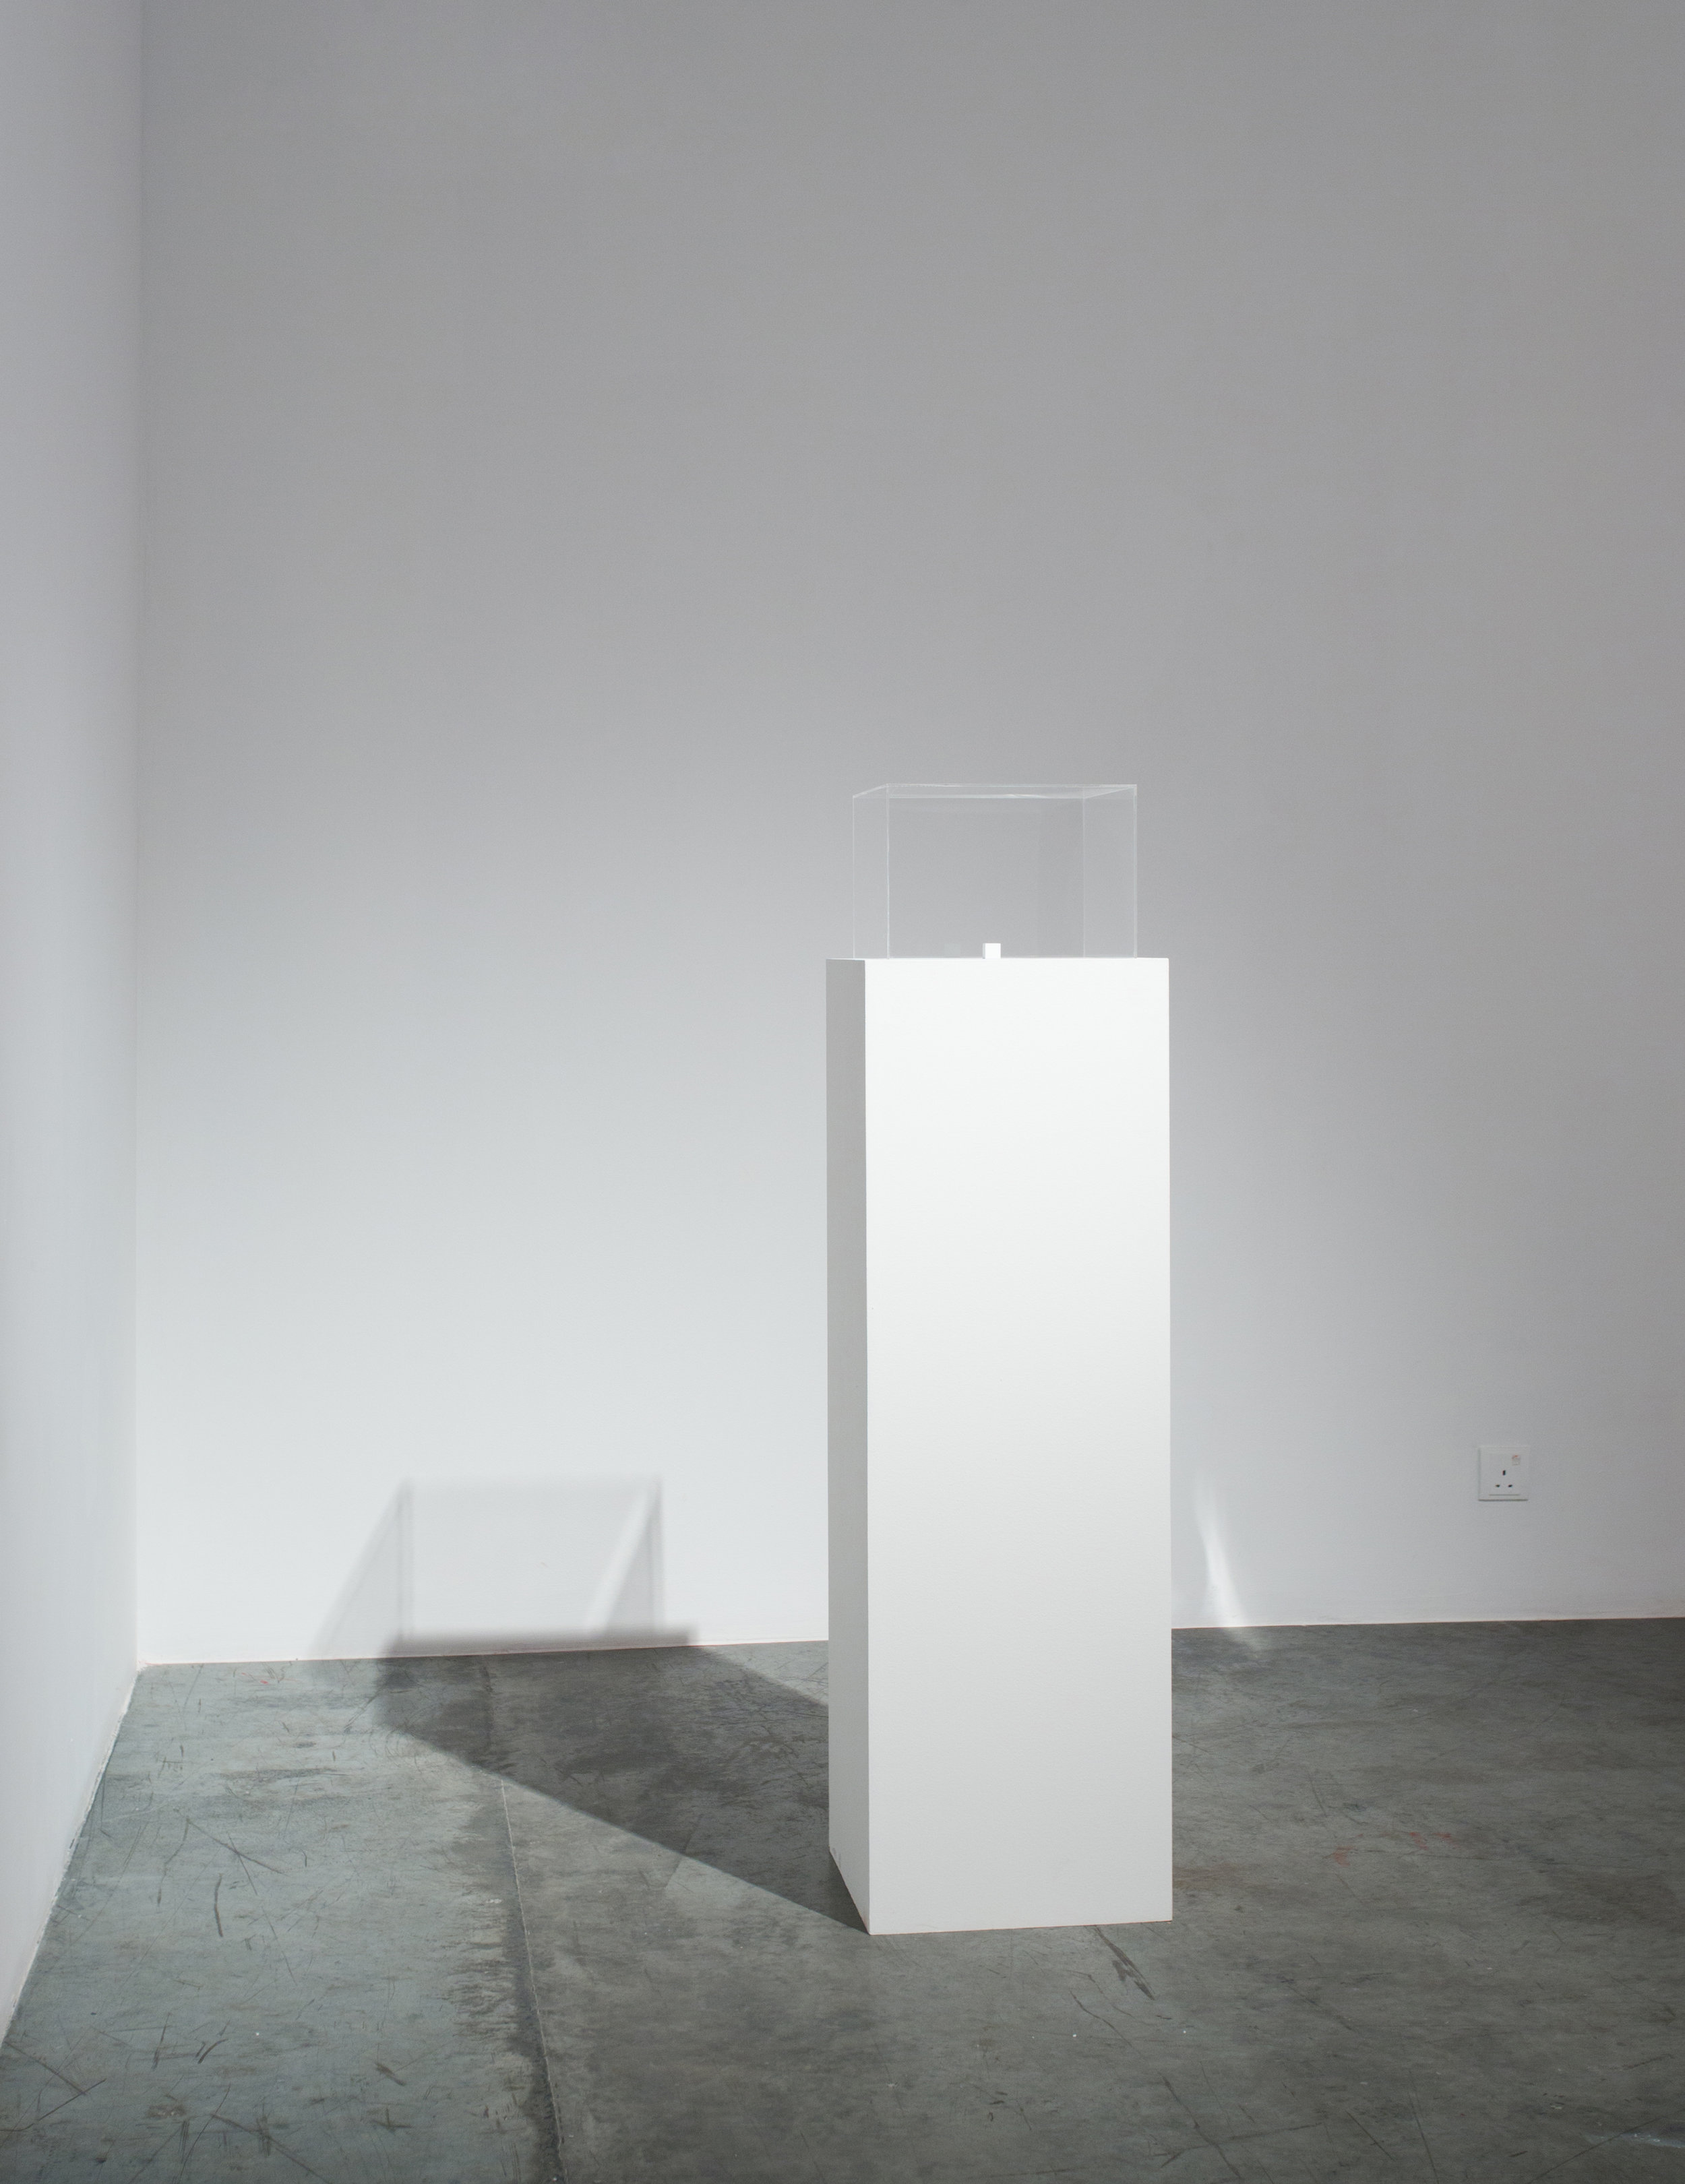  Charbel-joseph H. Boutros  1 cm3 of infinite darkness 2013 Steel polished mirrors, darkness, wood, white paint 1.8 x 1.8 x 1.8 cm Edition 1/3 